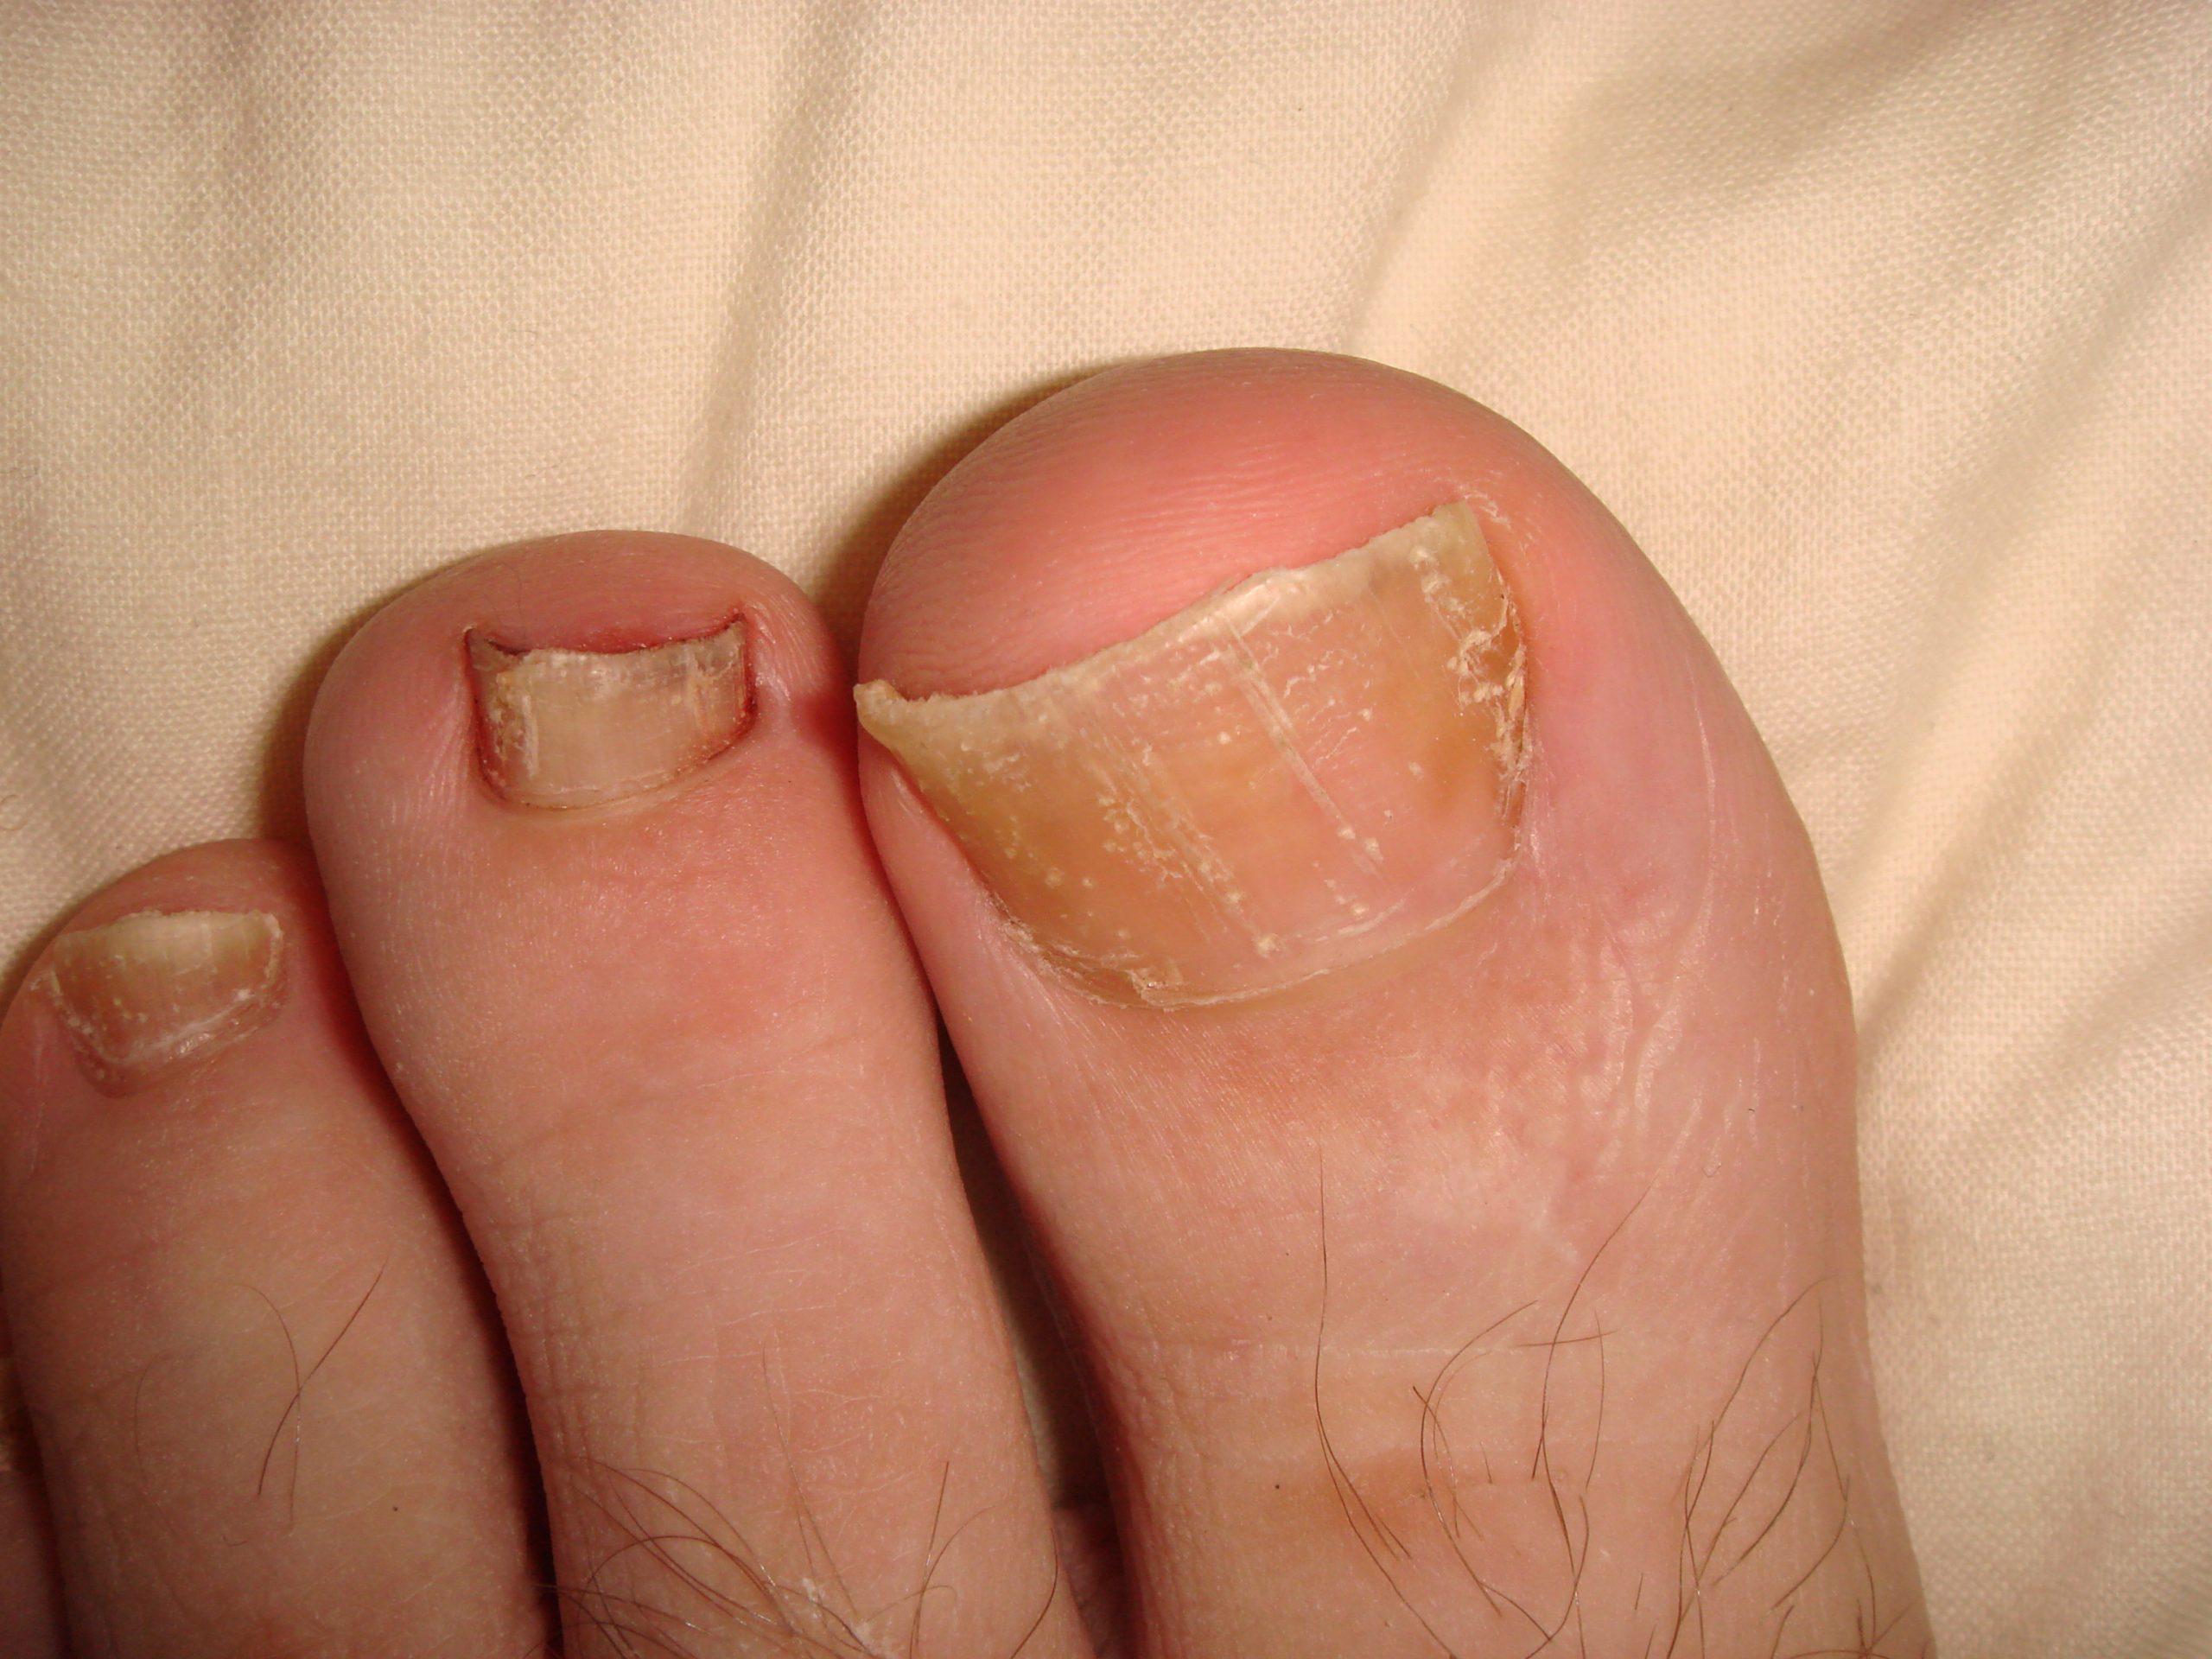 Psoriasis of nails- psoriatic nail dystrophy